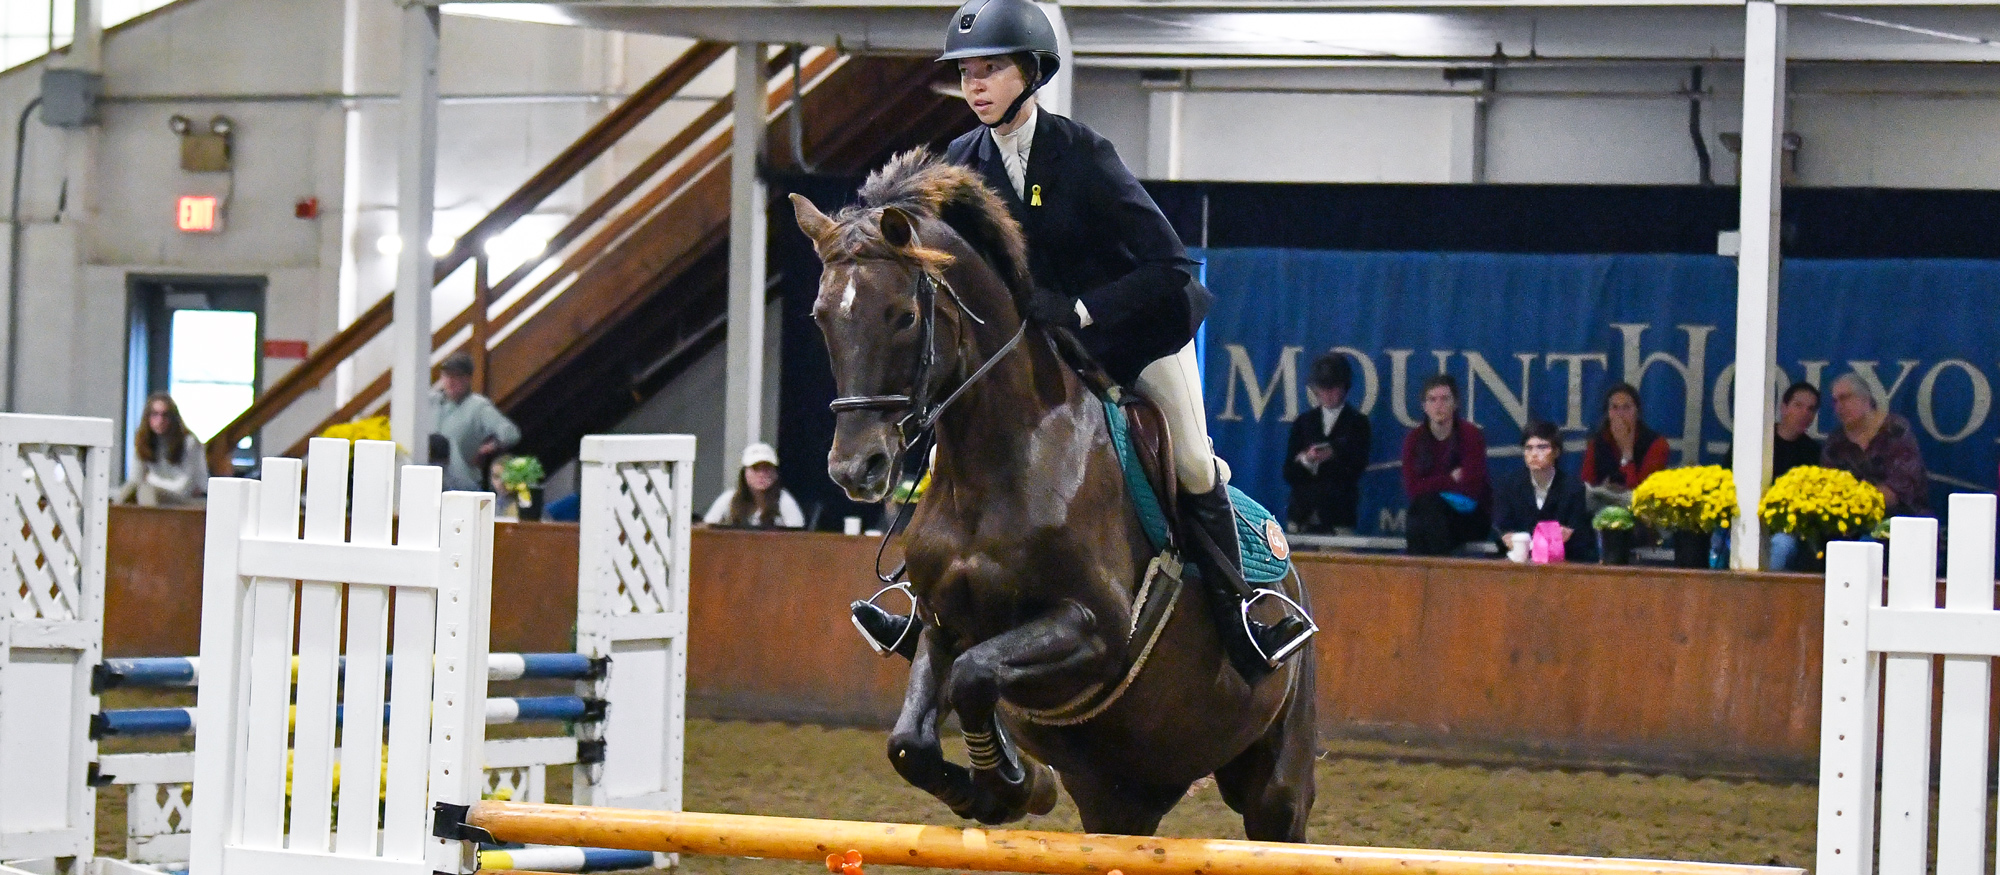 Emmie Mirarchi finished second in Team Intermediate Equitation Over Fences class on May 5, 2023 at IHSA Nationals in Lexington, Ky. Mirarchi has scored 16 of Mount Holyoke's 28 points through two days, leading the Lyons into third place among 16 teams. (RJB Sports file photo)